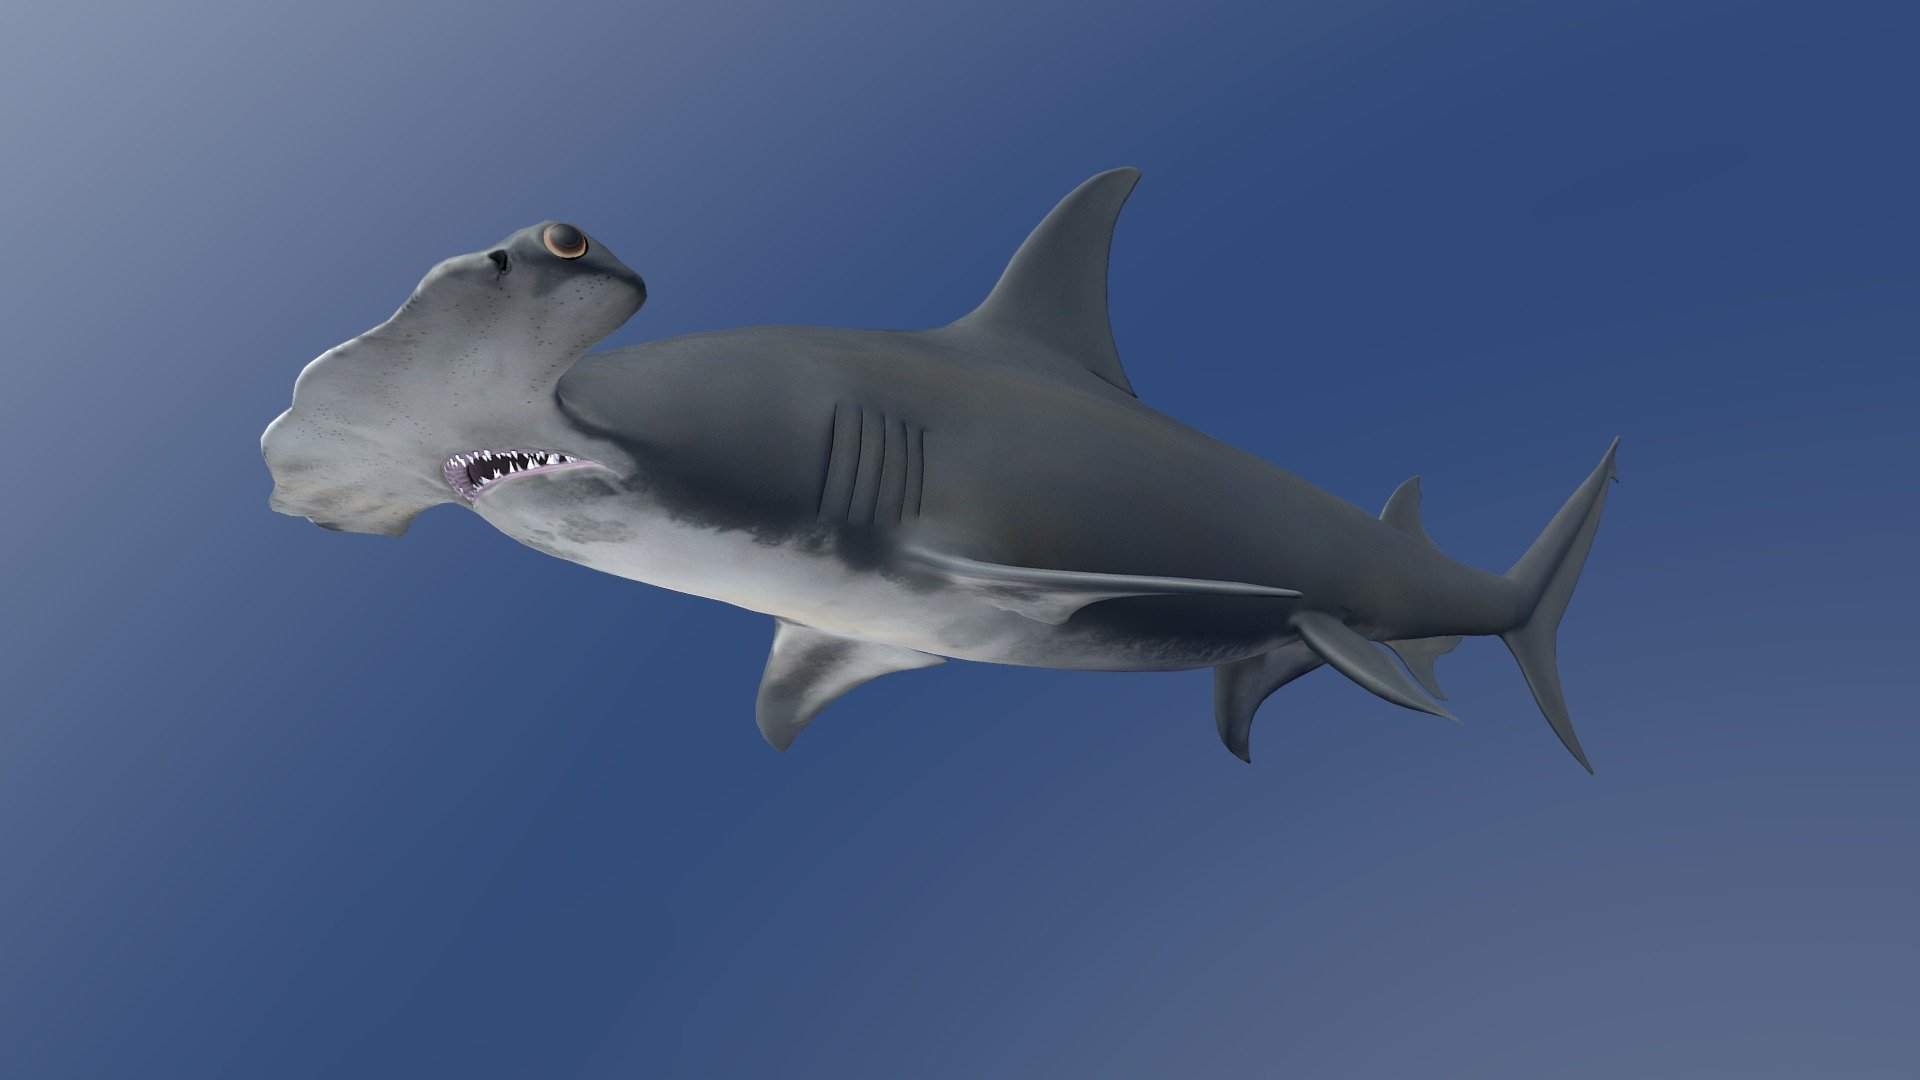 This is an animation of an adult female Great Hammerhead Shark (Sphyrna mokarran) that was reconstructed from multiple cameras arranged around a dive in South Bimini, Bahamas in February 2020.  Casey Sapp coordinated all videography.  Kevin Davidson kindly contributed useful reference photos.

CG artist Jer Bot used the software Blender to align these camera views to reconstruct the accurate shape and color of Nemesis (PIT tag 900236000107365), which had an estimated length of 329 cm based on laser photogrammetry.  Nemesis commonly frequents dive spots near Bimini and is well-known to divers and scientists from the Bimini shark lab (www.biminisharklab.com).

The ANGARI Foundation (www.angari.org) coordinated and supported this research, along with Sean Williams, Ken Morton, Jonathan and Jameson Bayuk, Annabelle Brooks, and Vital Heim.

Downloads are freely available for creative and non-profit use. To inquire about licensing, please visit www.digitallife3d.org 3d model